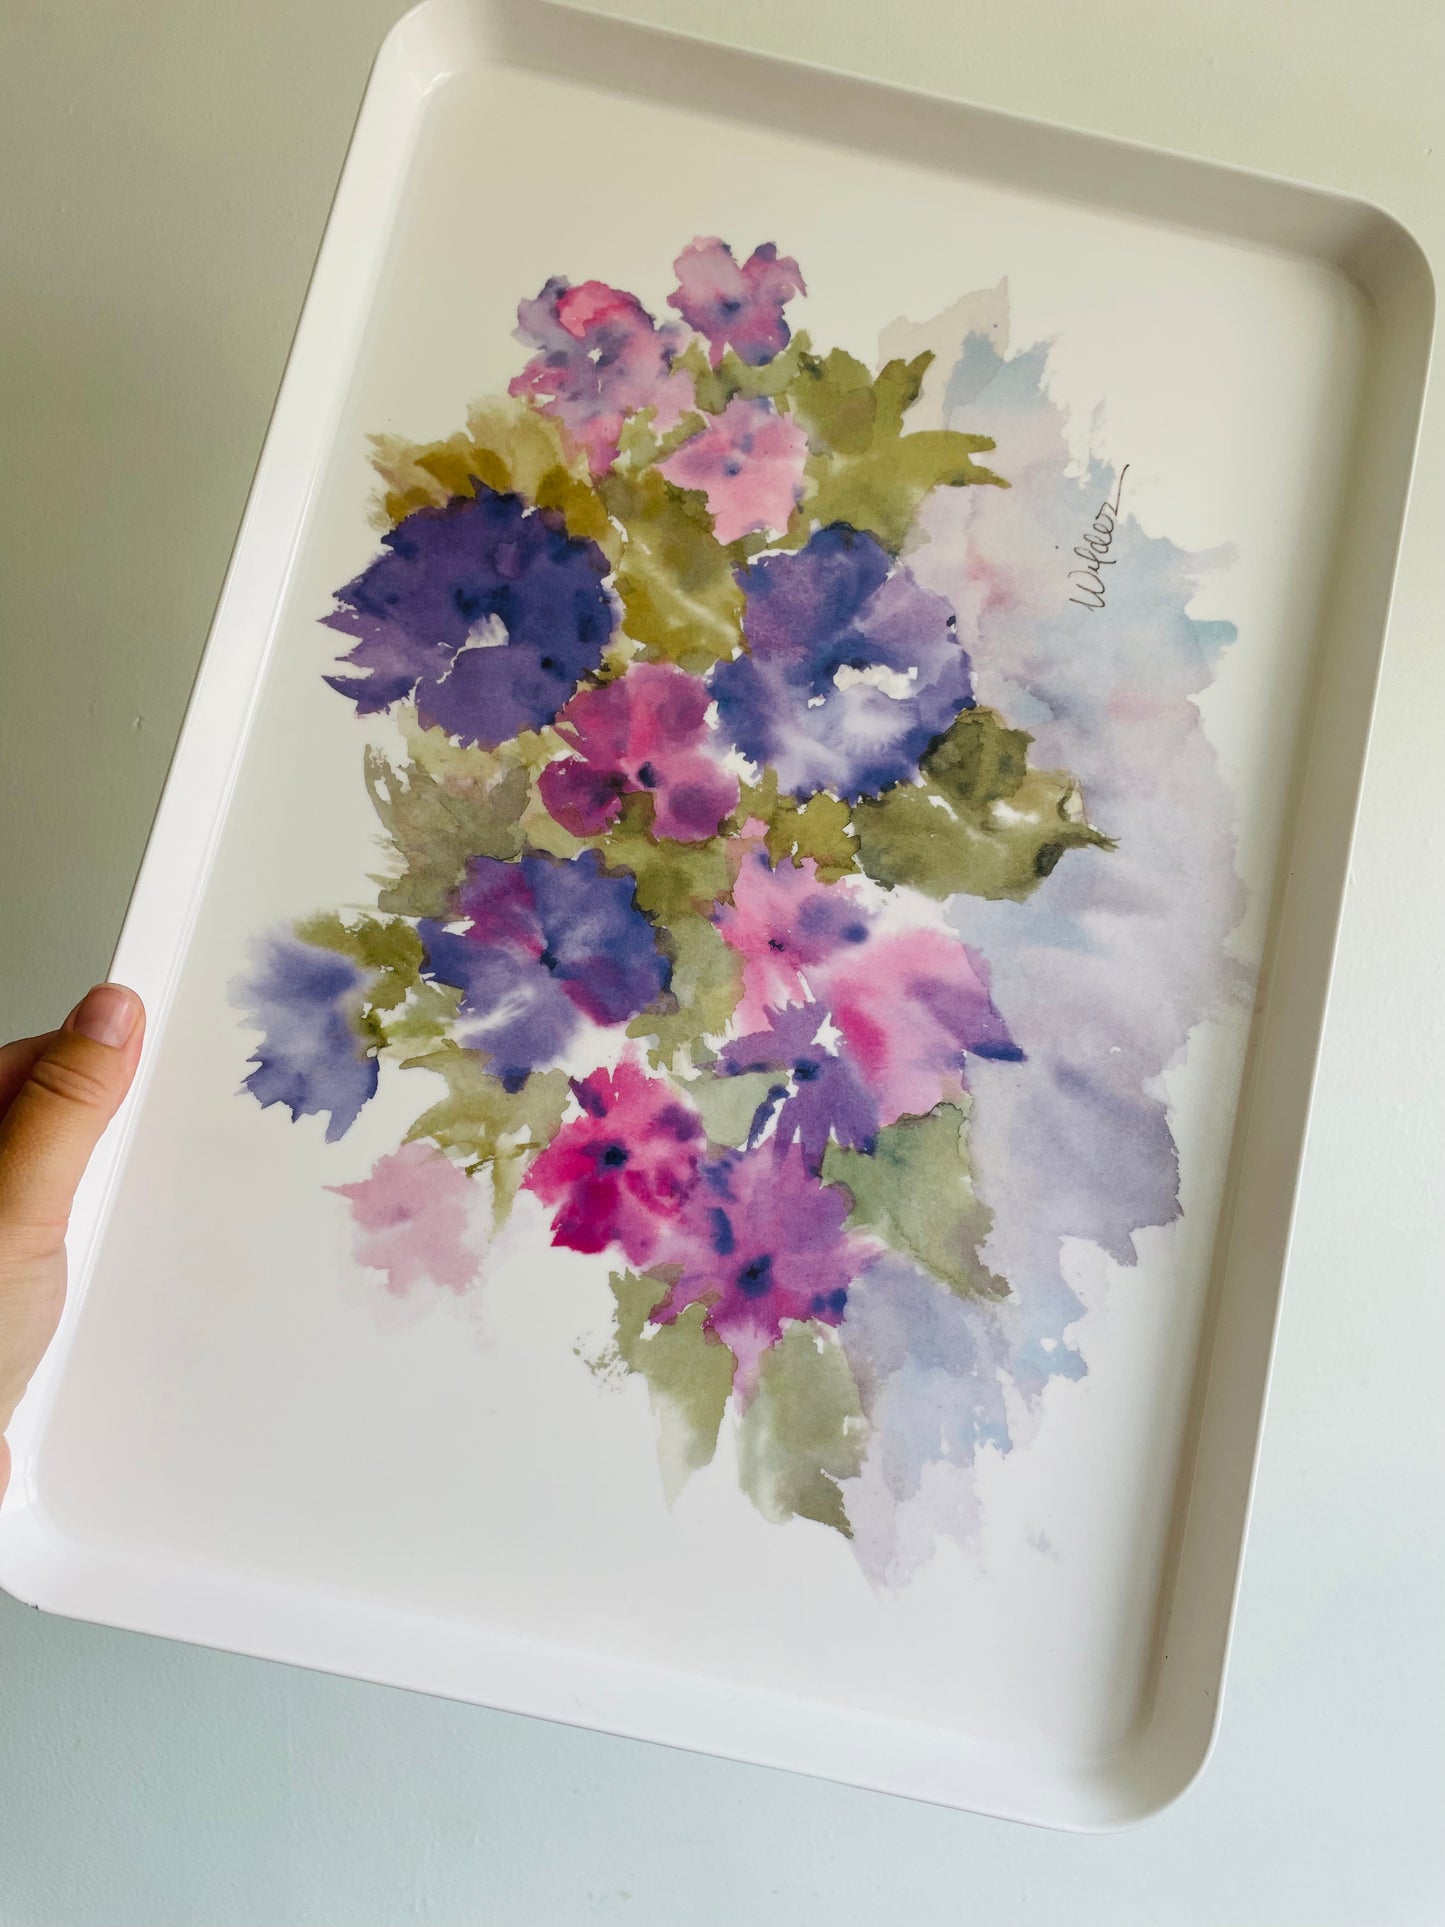 Melplus by R2S Melamine Decorative or Serving Tray with Watercolour Flower Design - Made in Italy #1